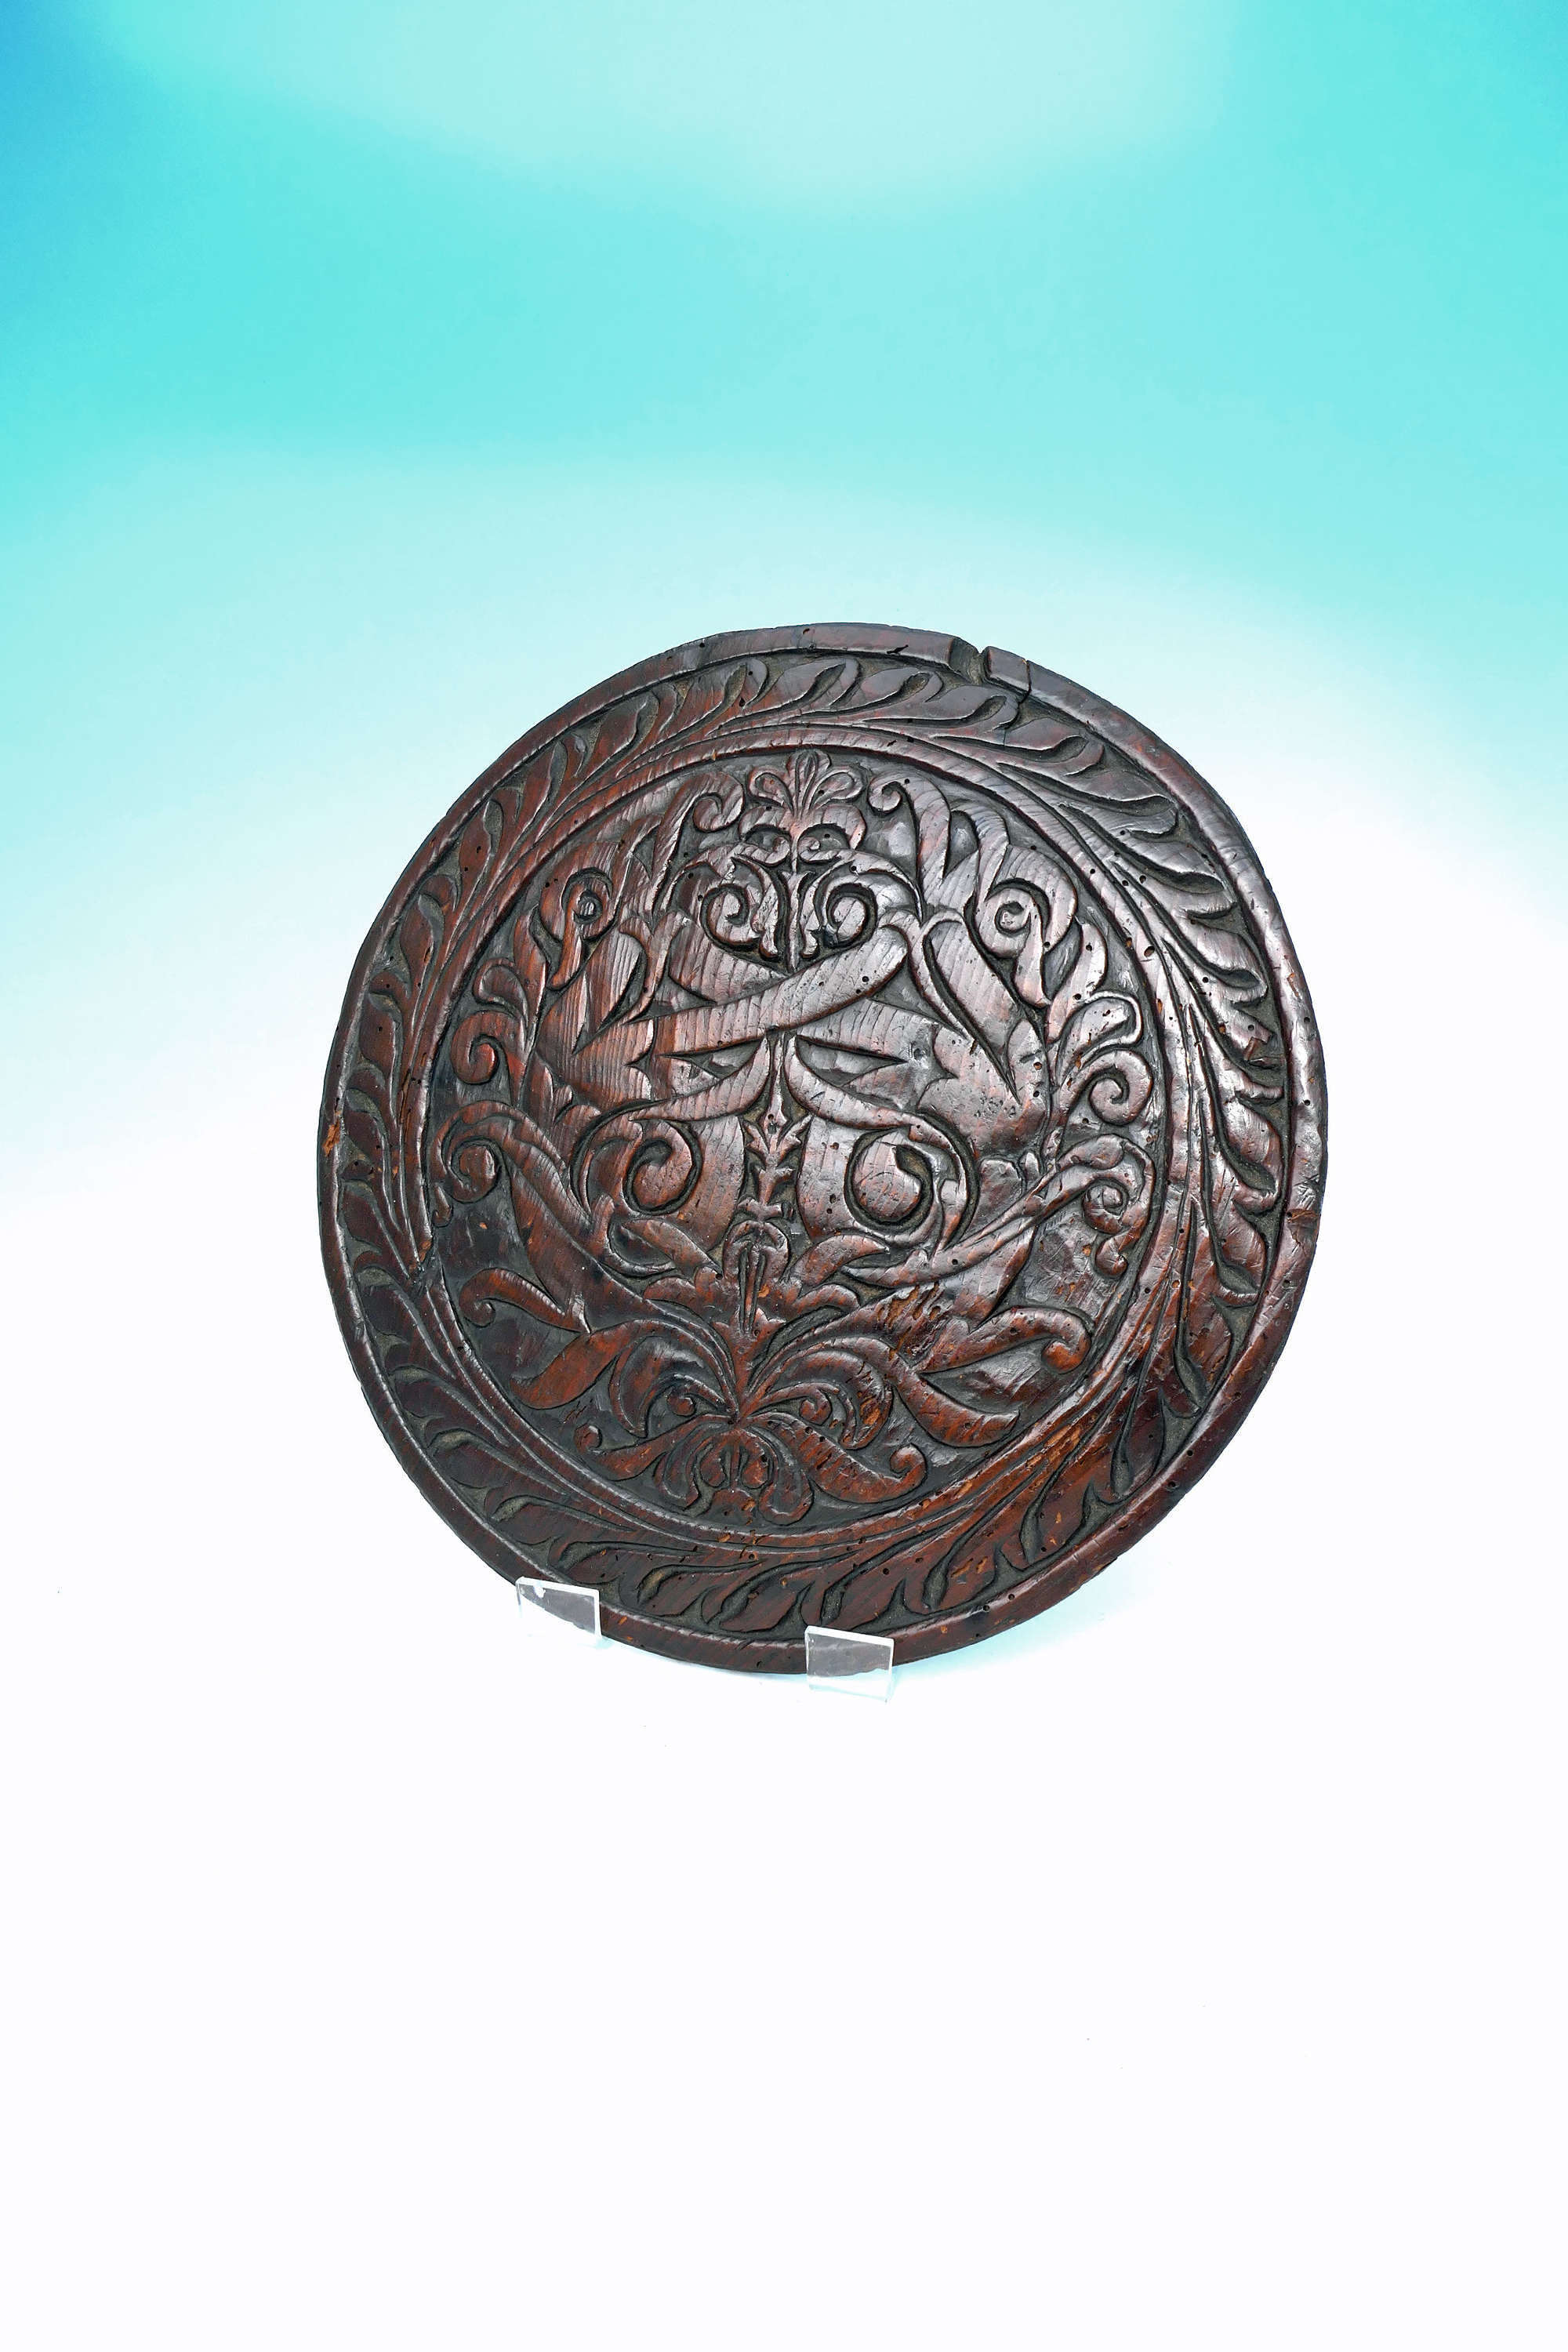 Antique Carved 17thc Pine Roundel Decorated With A Floral Pattern.